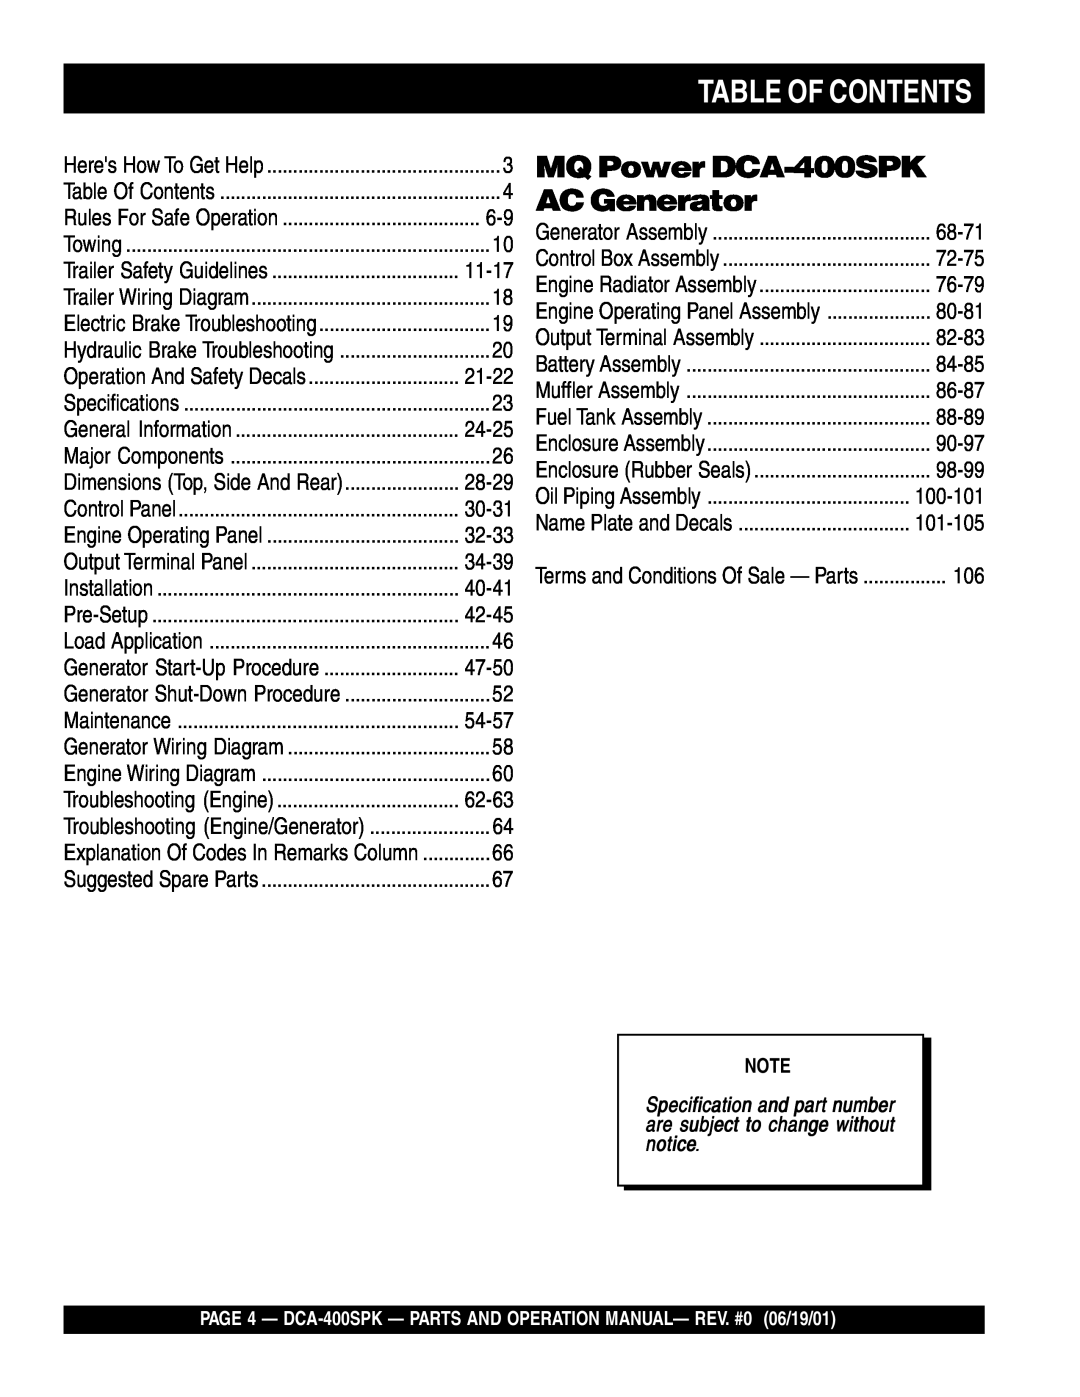 Multiquip operation manual Table Of Contents, MQ Power DCA-400SPKAC Generator 